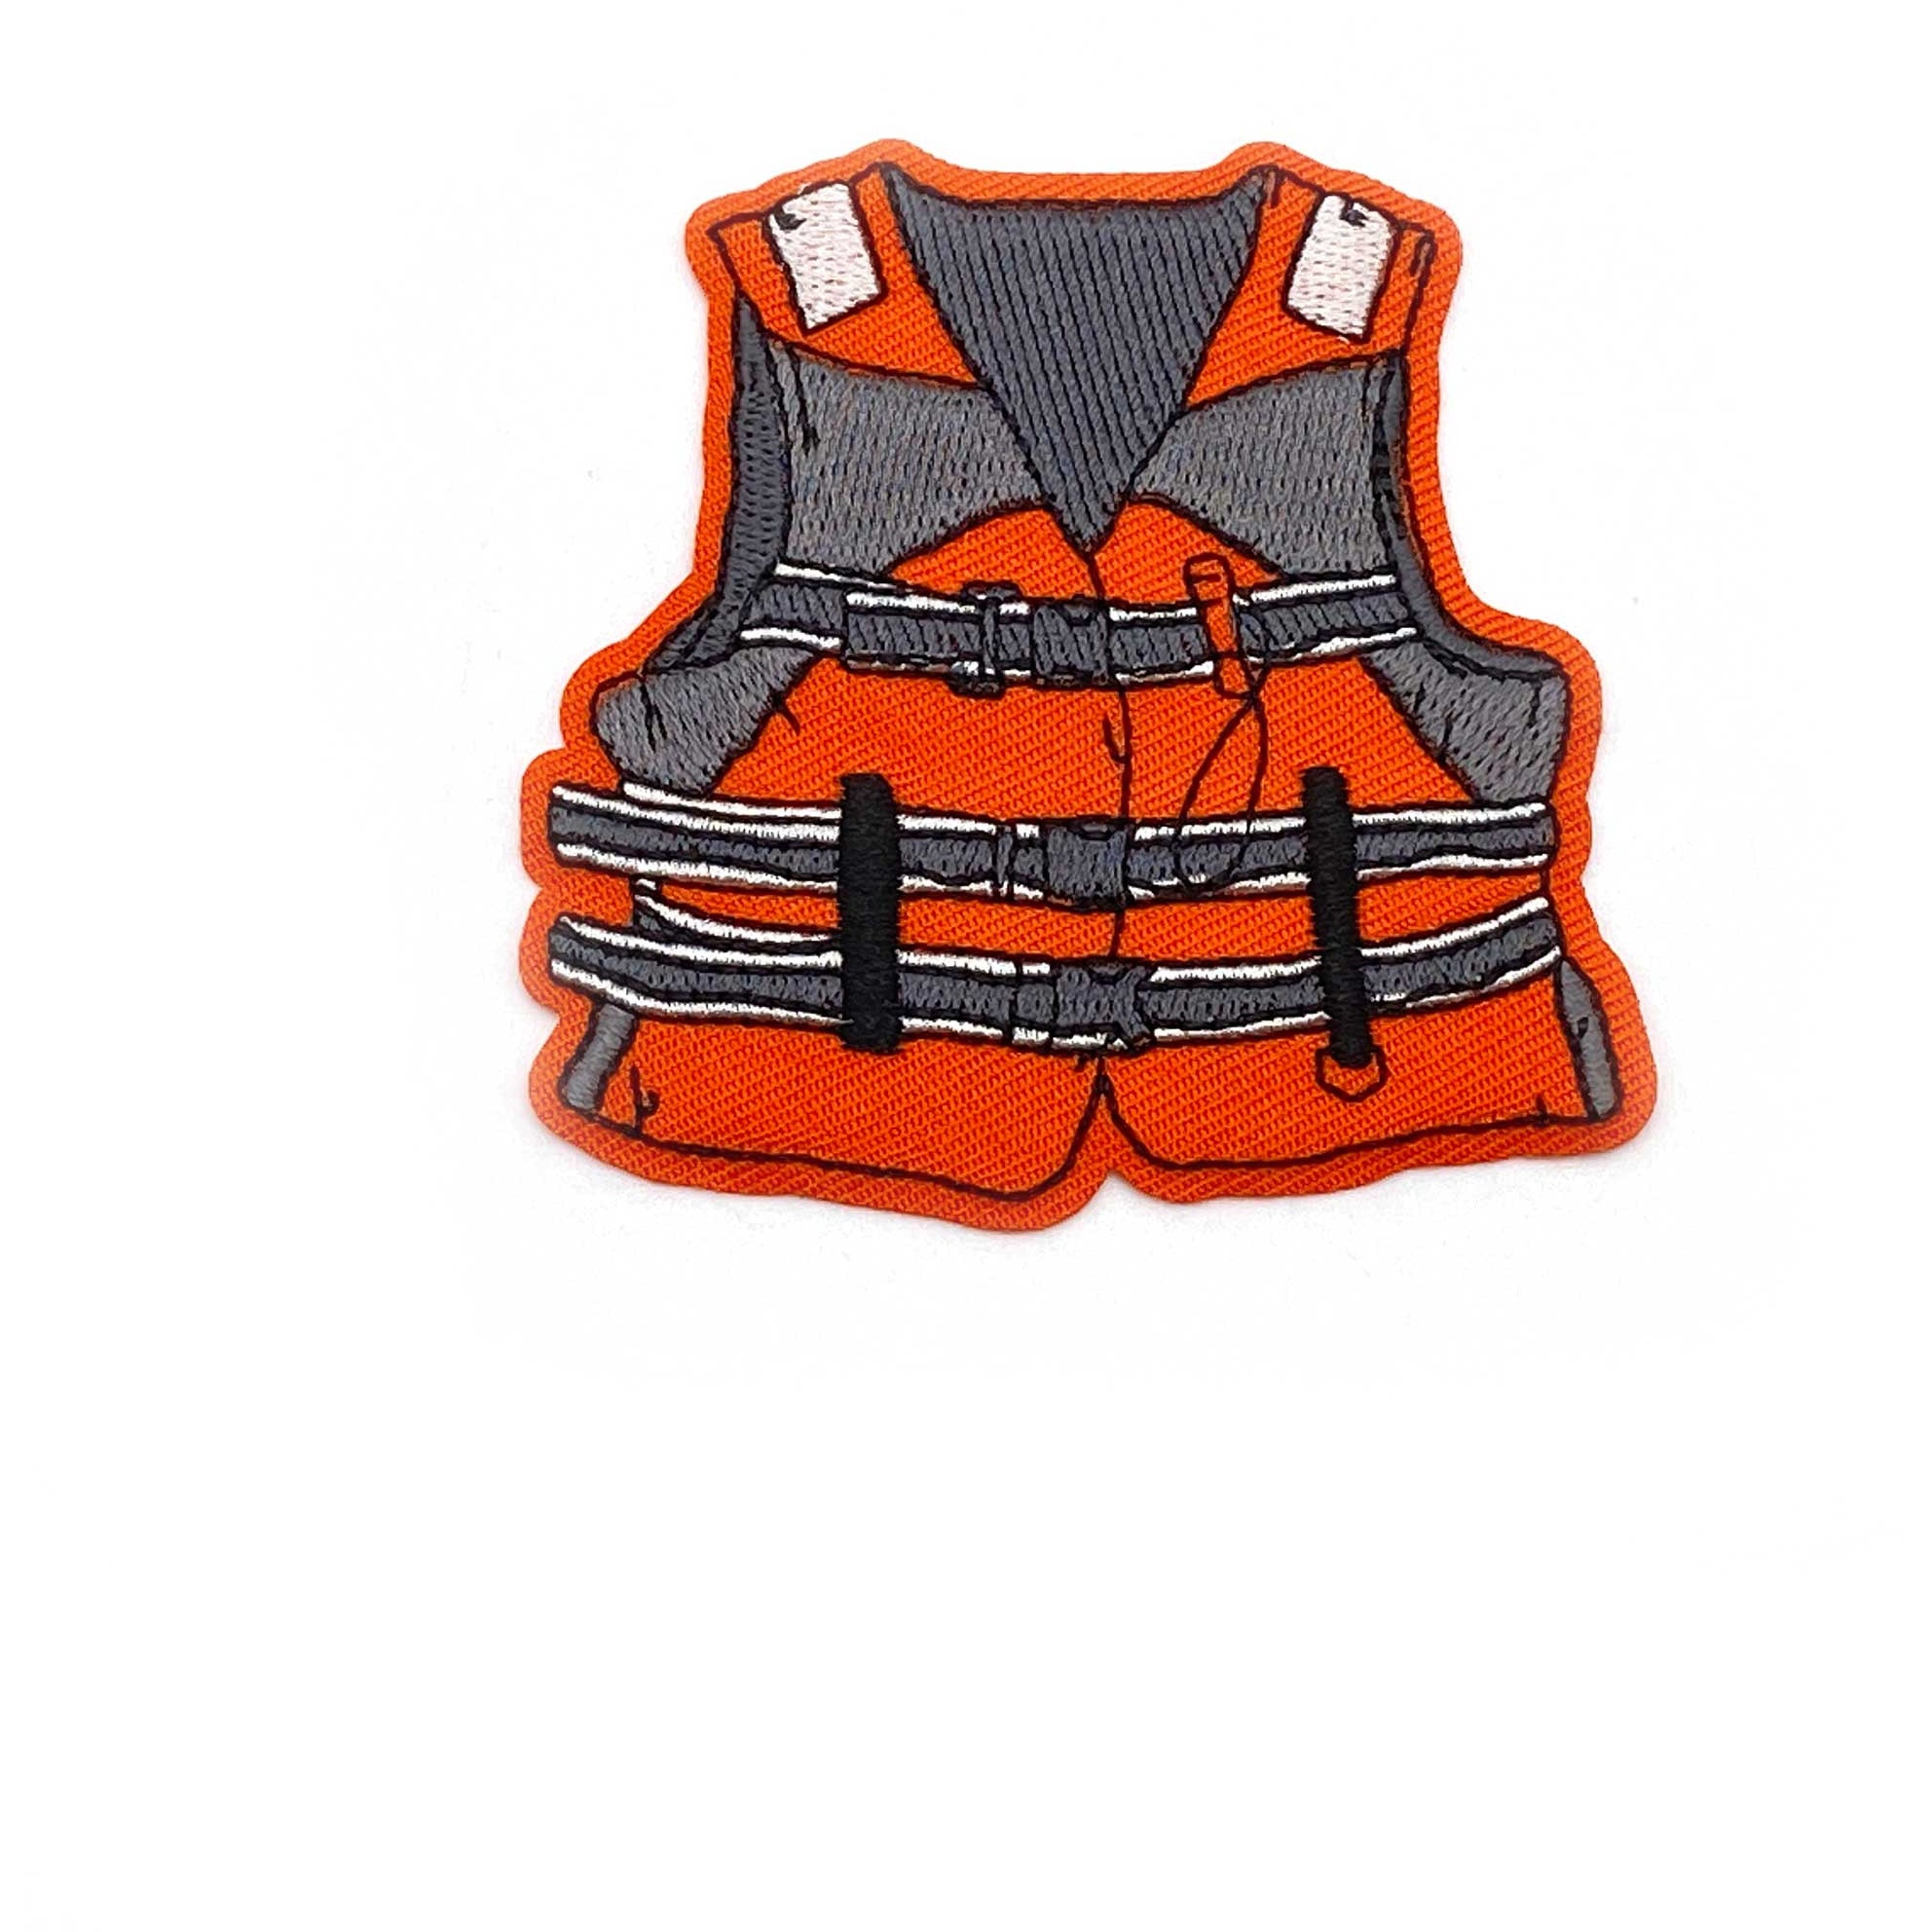 Iron-on Patch: ALWAYS WEAR YOUR LIFE JACKET